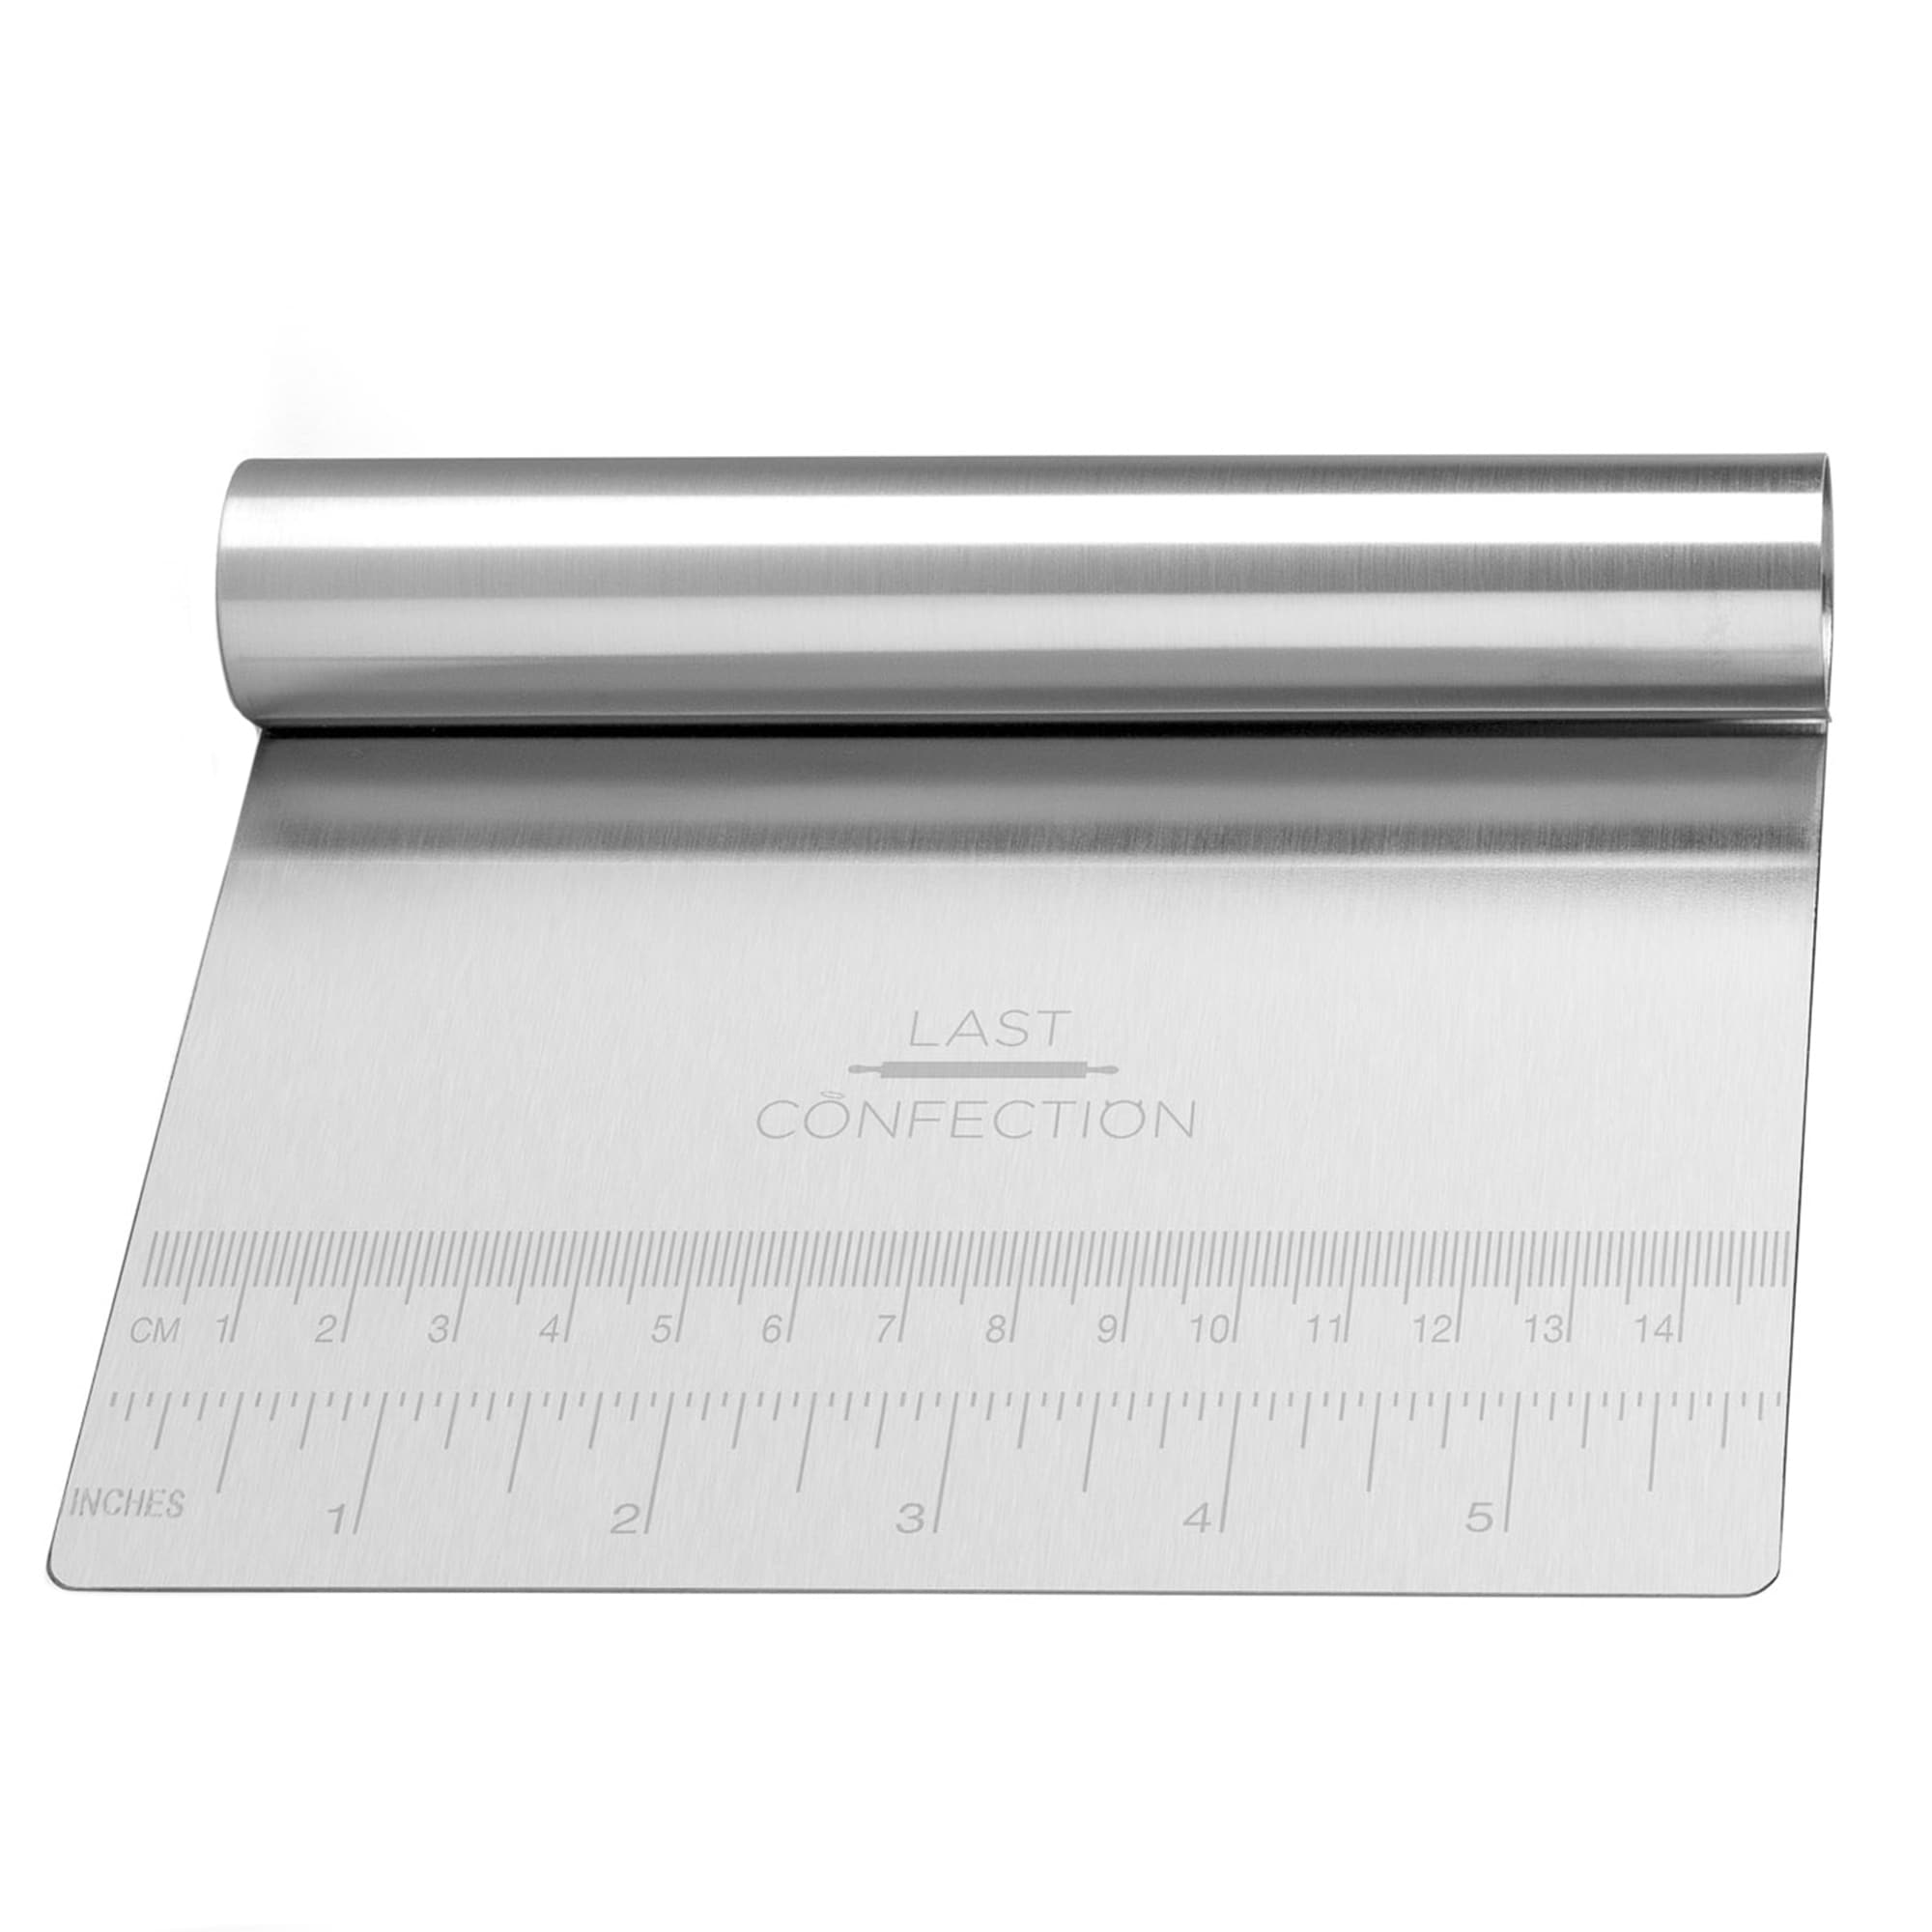 Stainless Steel Pastry Bench Scraper  Dough Cutter Last Confection  Stainless Steel Bed Bath  Beyond 30837074